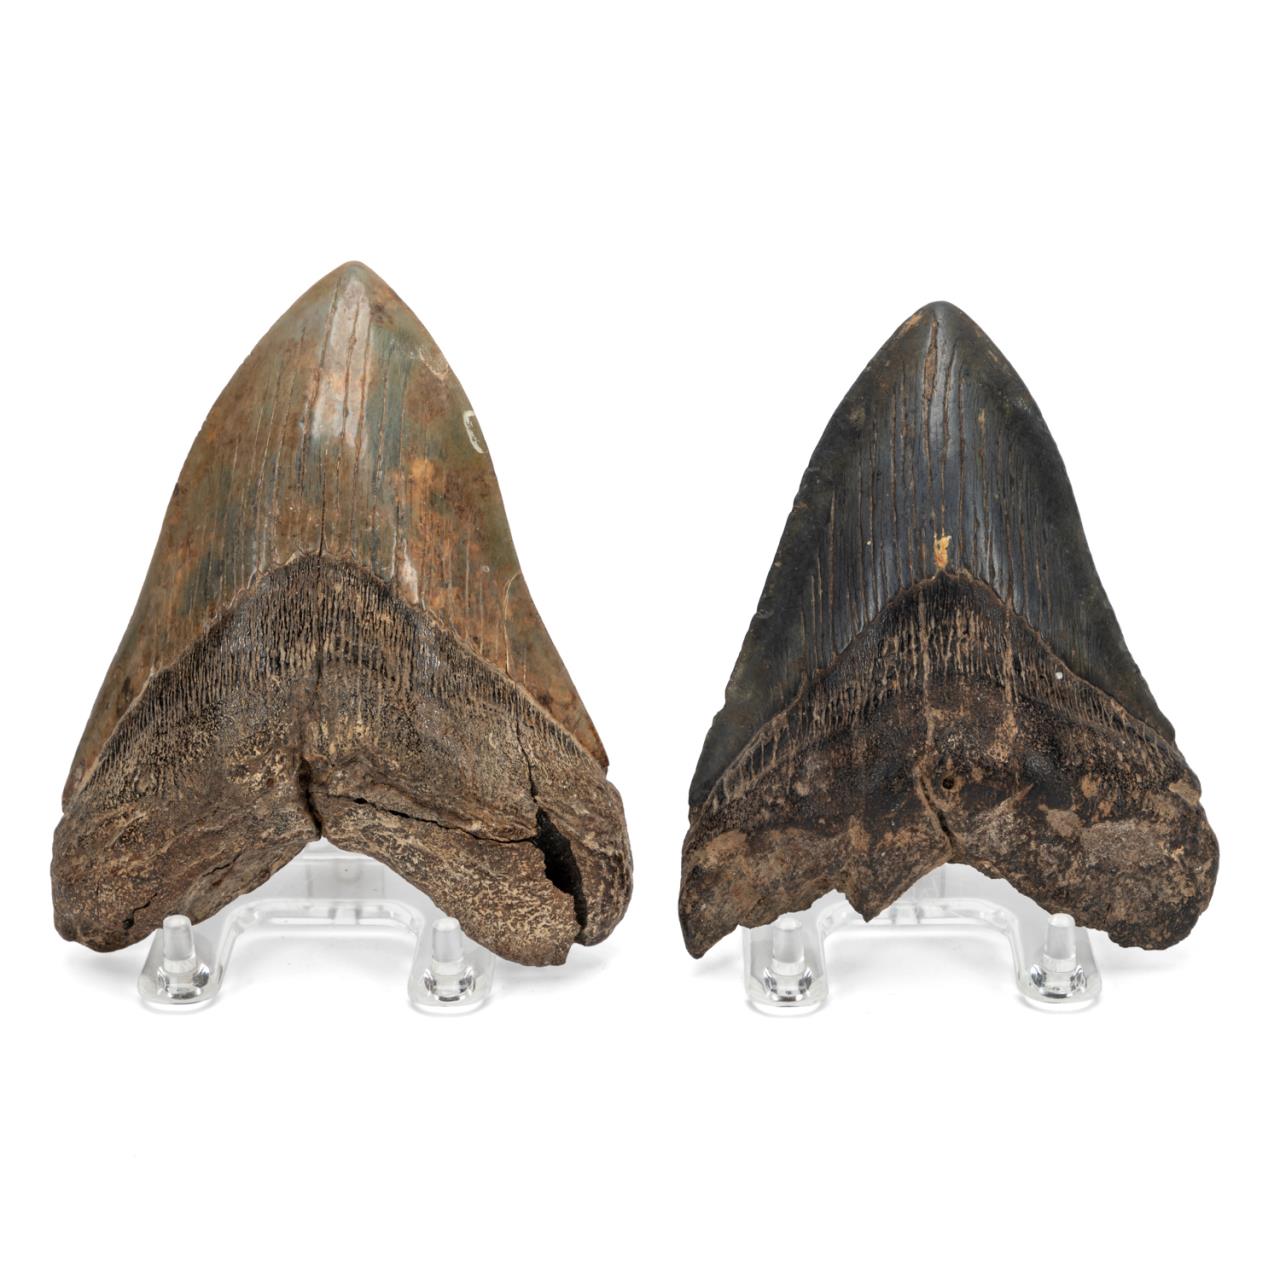 TWO FOSSILIZED MEGALODON SHARK